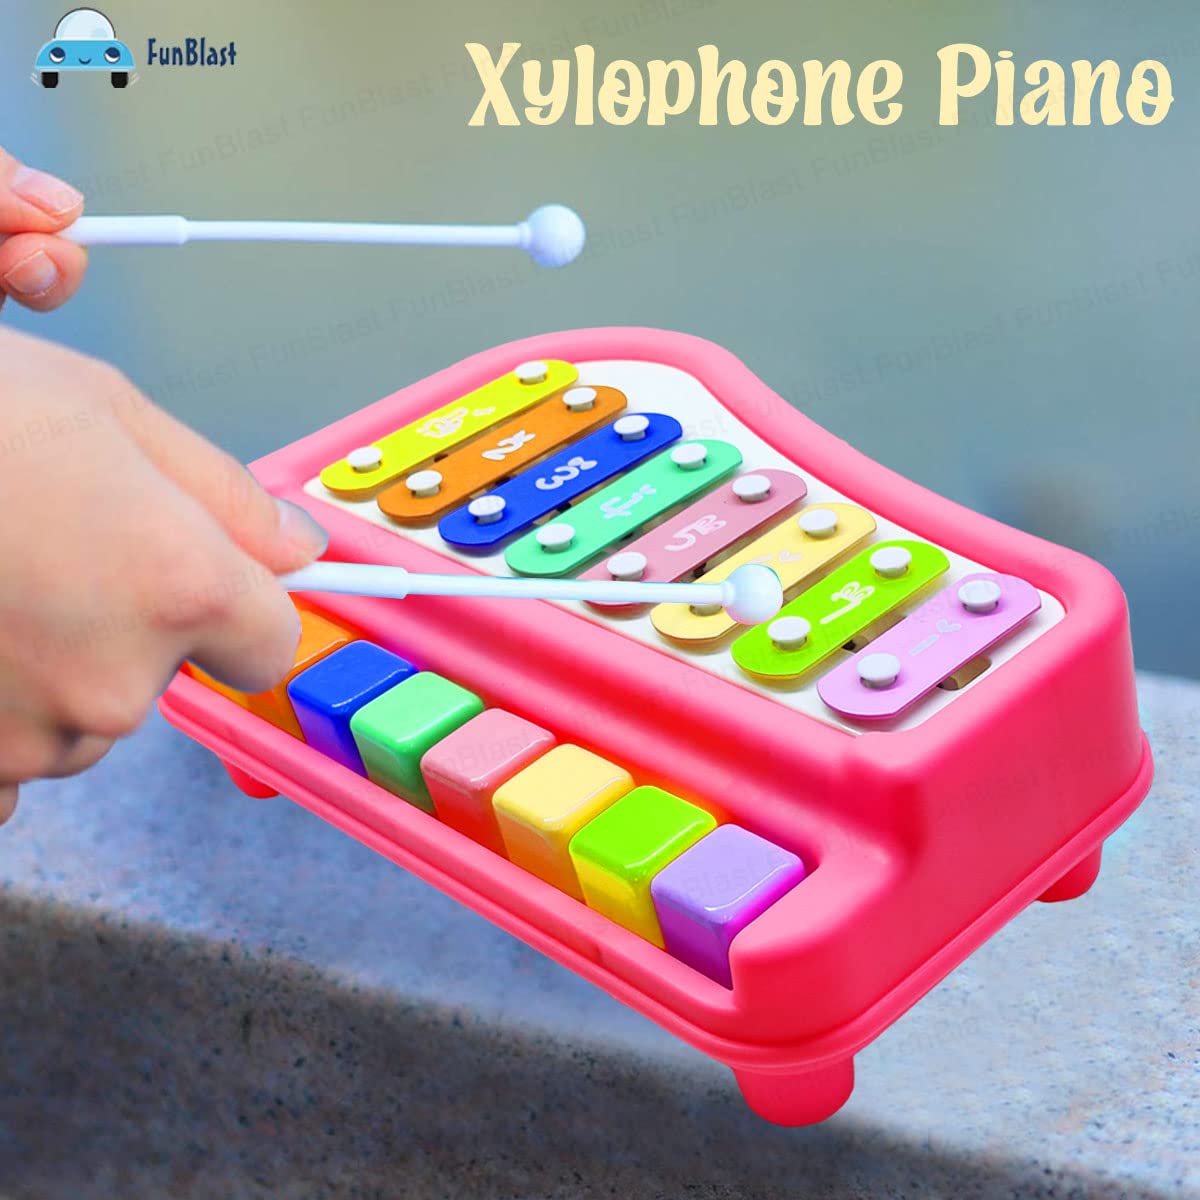 FunBlast Xylophone - Hand Knock Piano Toys, Hammering & Pounding Toys, Xylophone for Kids, Kids Musical Instruments, Kids Xylophone, Xylophone for 1+ Year Old, Kids Drums & Percussion Toy (Red)